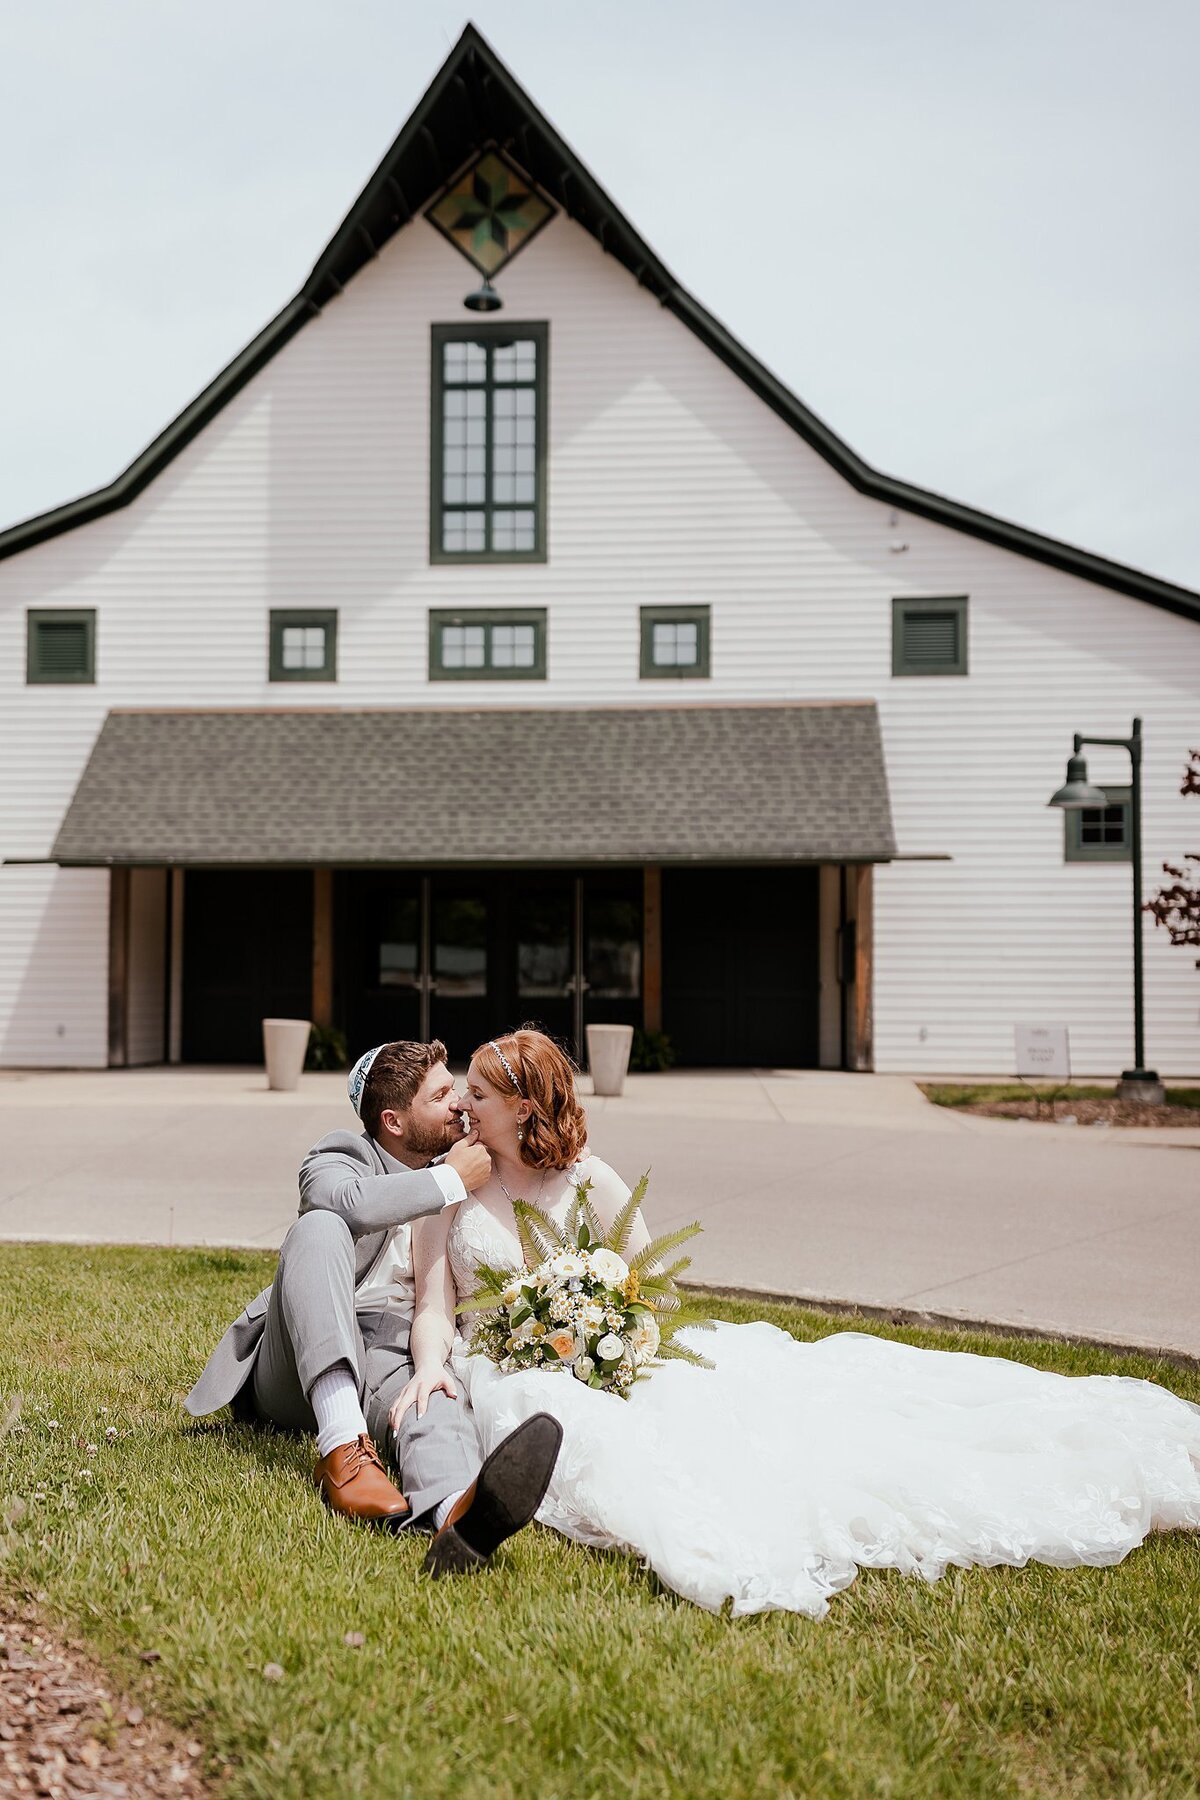 Jewish groom wearing a light grey suit and white kippot kisses a redheaded bride in a flowing white dress. The bride is holding a large bouquet of fern and wild flowers in front of a large white barn with green trim at Loveless Cafe in Nashville, TN